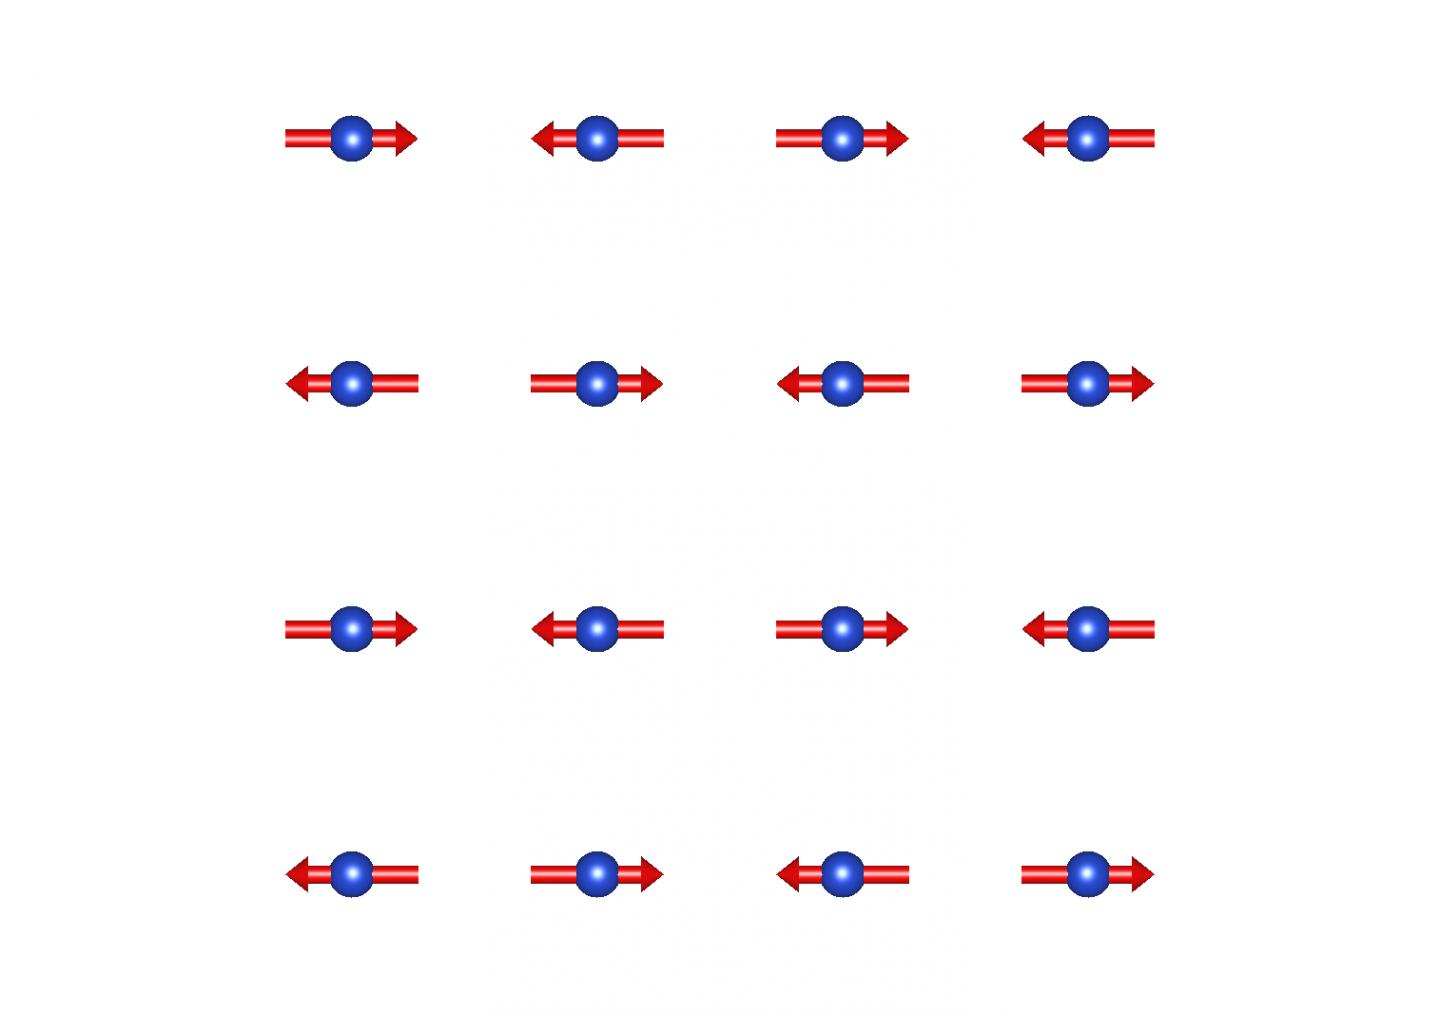 The Magnetically Ordered Square Lattice of Copper Ions